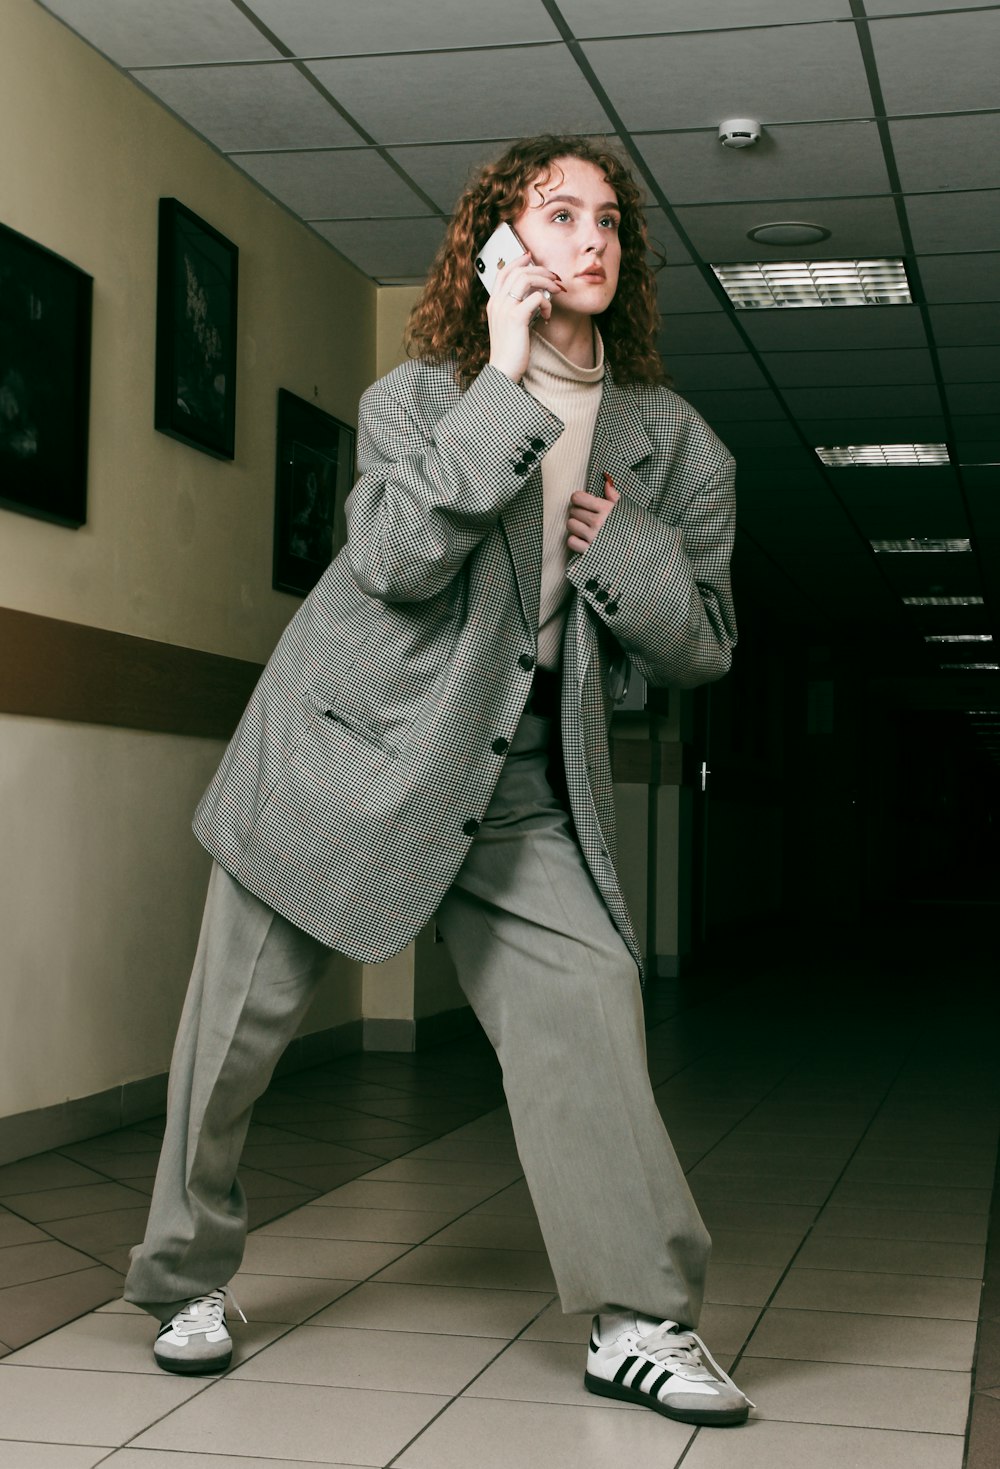 a woman in a suit is talking on a cell phone